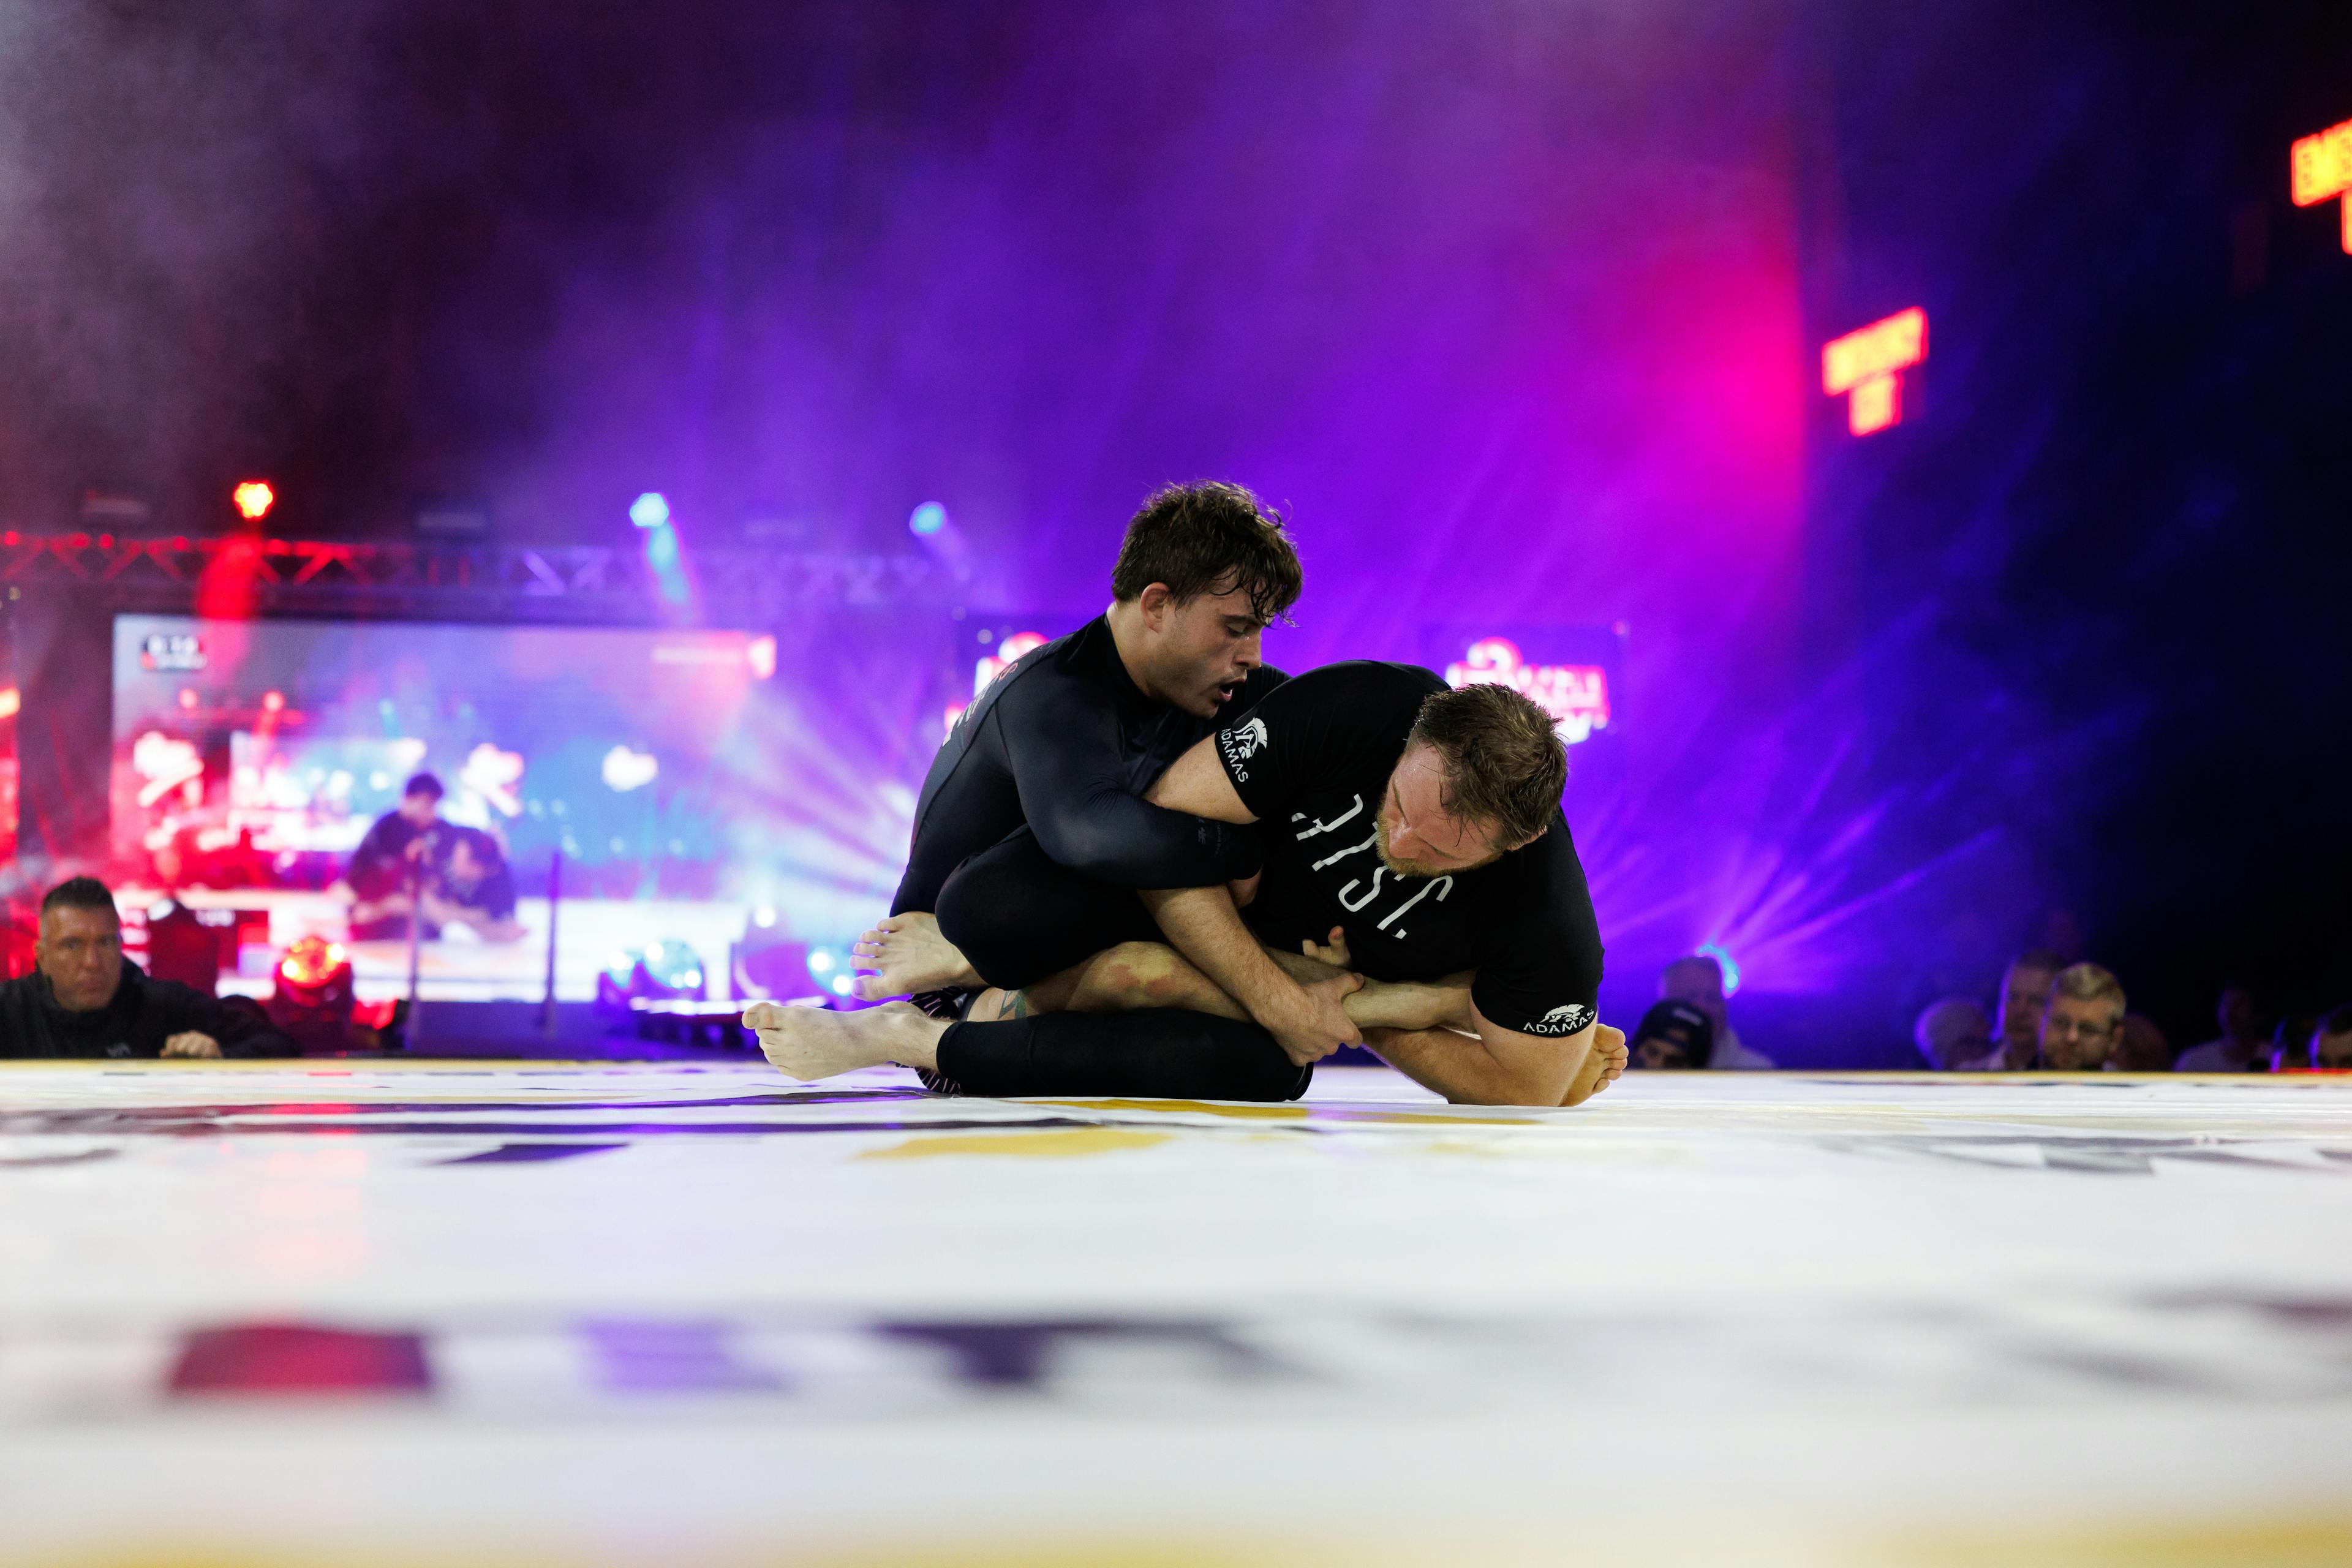 A competitor performing a leg lock on another competitor